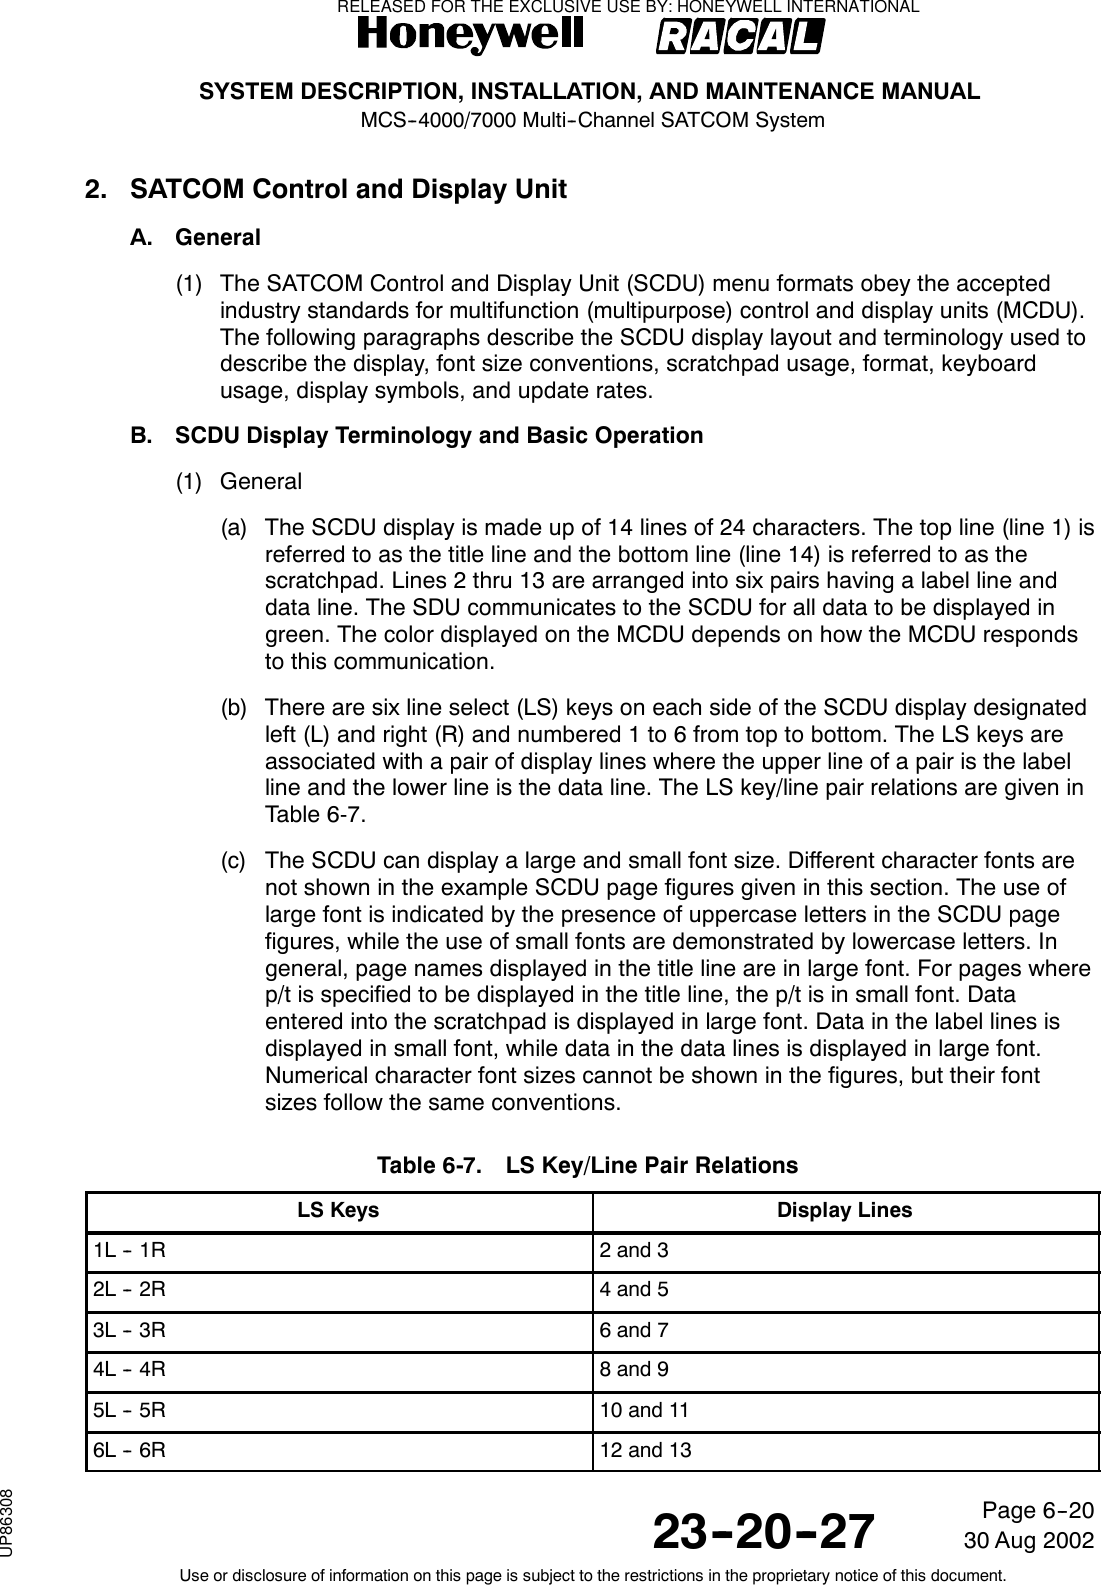 SYSTEM DESCRIPTION, INSTALLATION, AND MAINTENANCE MANUALMCS--4000/7000 Multi--Channel SATCOM System23--20--2730 Aug 2002Use or disclosure of information on this page is subject to the restrictions in the proprietary notice of this document.Page 6--202. SATCOM Control and Display UnitA. General(1) The SATCOM Control and Display Unit (SCDU) menu formats obey the acceptedindustry standards for multifunction (multipurpose) control and display units (MCDU).The following paragraphs describe the SCDU display layout and terminology used todescribe the display, font size conventions, scratchpad usage, format, keyboardusage, display symbols, and update rates.B. SCDU Display Terminology and Basic Operation(1) General(a) The SCDU display is made up of 14 lines of 24 characters. The top line (line 1) isreferredtoasthetitlelineandthebottomline(line14)isreferredtoasthescratchpad. Lines 2 thru 13 are arranged into six pairs having a label line anddata line. The SDU communicates to the SCDU for all data to be displayed ingreen. The color displayed on the MCDU depends on how the MCDU respondsto this communication.(b) There are six line select (LS) keys on each side of the SCDU display designatedleft (L) and right (R) and numbered 1 to 6 from top to bottom. The LS keys areassociated with a pair of display lines where the upper line of a pair is the labelline and the lower line is the data line. The LS key/line pair relations are given inTable 6-7.(c) The SCDU can display a large and small font size. Different character fonts arenot shown in the example SCDU page figures given in this section. The use oflarge font is indicated by the presence of uppercase letters in the SCDU pagefigures, while the use of small fonts are demonstrated by lowercase letters. Ingeneral, page names displayed in the title line are in large font. For pages wherep/t is specified to be displayed in the title line, the p/t is in small font. Dataentered into the scratchpad is displayed in large font. Data in the label lines isdisplayed in small font, while data in the data lines is displayed in large font.Numerical character font sizes cannot be shown in the figures, but their fontsizes follow the same conventions.Table 6-7. LS Key/Line Pair RelationsLS Keys Display Lines1L -- 1R 2 and 32L -- 2R 4 and 53L -- 3R 6 and 74L -- 4R 8 and 95L -- 5R 10 and 116L -- 6R 12 and 13RELEASED FOR THE EXCLUSIVE USE BY: HONEYWELL INTERNATIONALUP86308